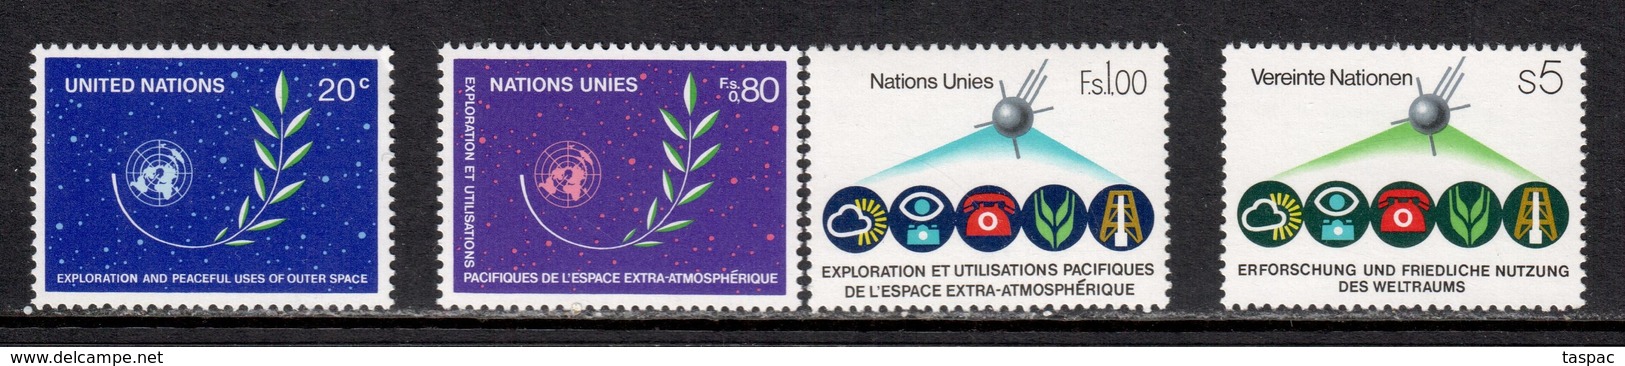 United Nations 1982 New York Mi# 396; Geneva 107-108; Vienna 26 ** MNH - Exploration And Peaceful Uses Of Outer Space - América Del Norte